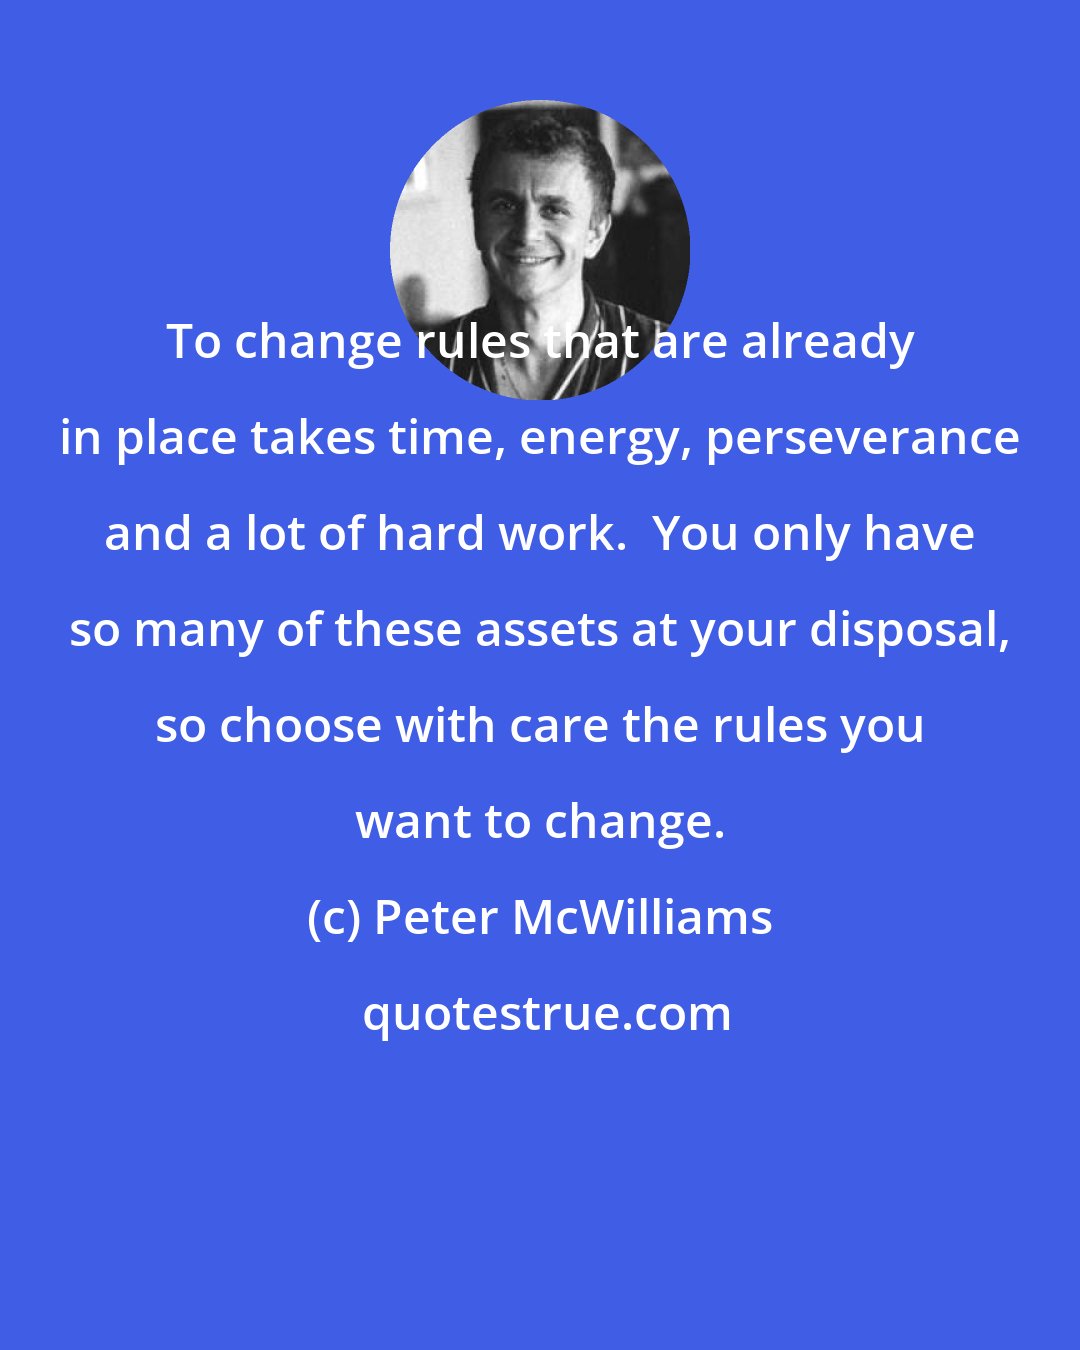 Peter McWilliams: To change rules that are already in place takes time, energy, perseverance and a lot of hard work.  You only have so many of these assets at your disposal, so choose with care the rules you want to change.